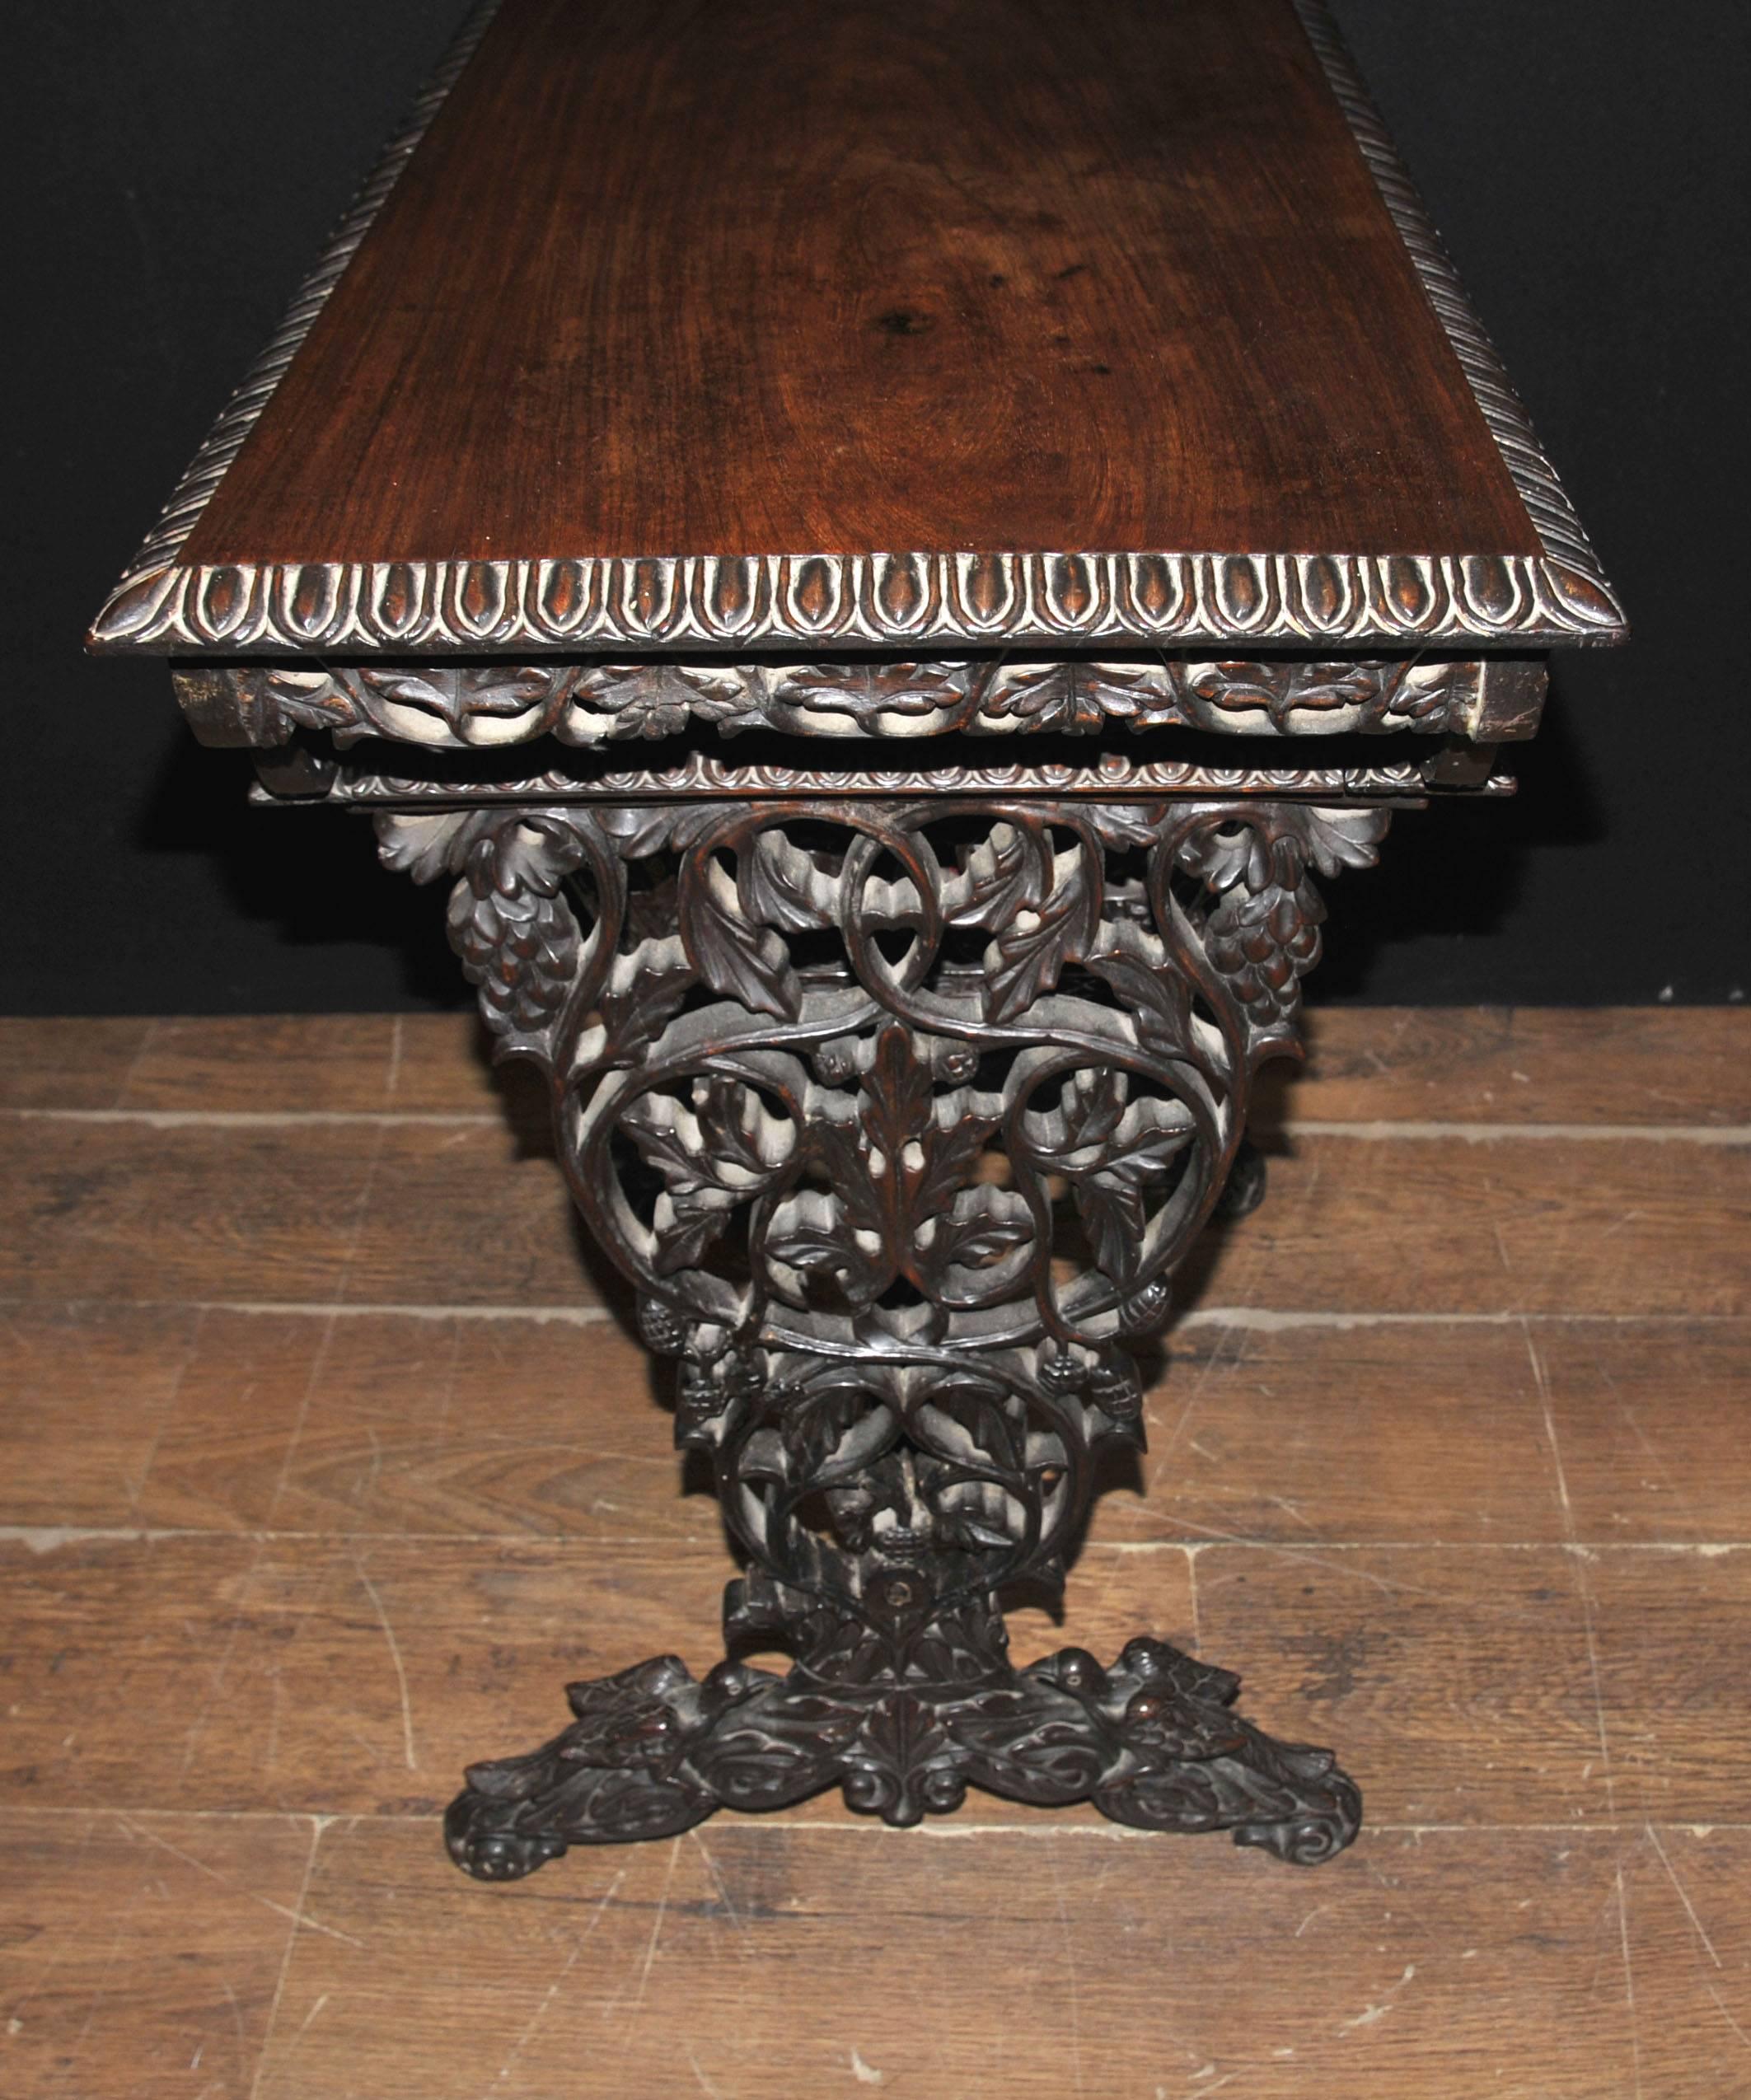 Amazing hand-carved antique Burmese writing table or desk.
Hopefully the photos illustrate the amazingly detailed hand-carved features.
Typical of Burmese furniture, carved from hardwood.
Large drawer opens out below to reveal lots of additional